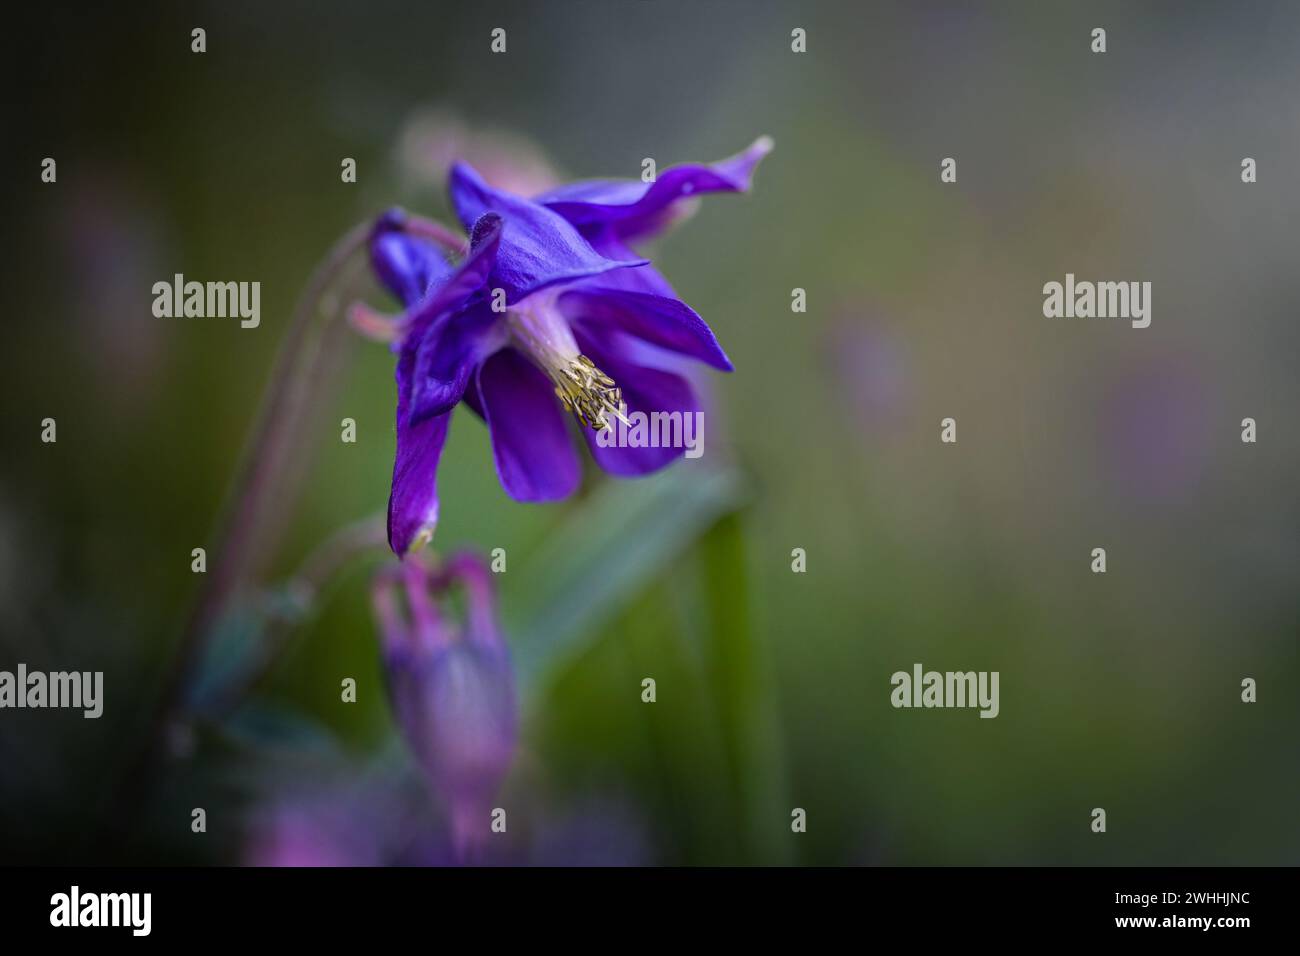 Violet flower of common columbine (Aquilegia vulgaris) in a wild meadow, macro shot against a green background, copy space, sele Stock Photo